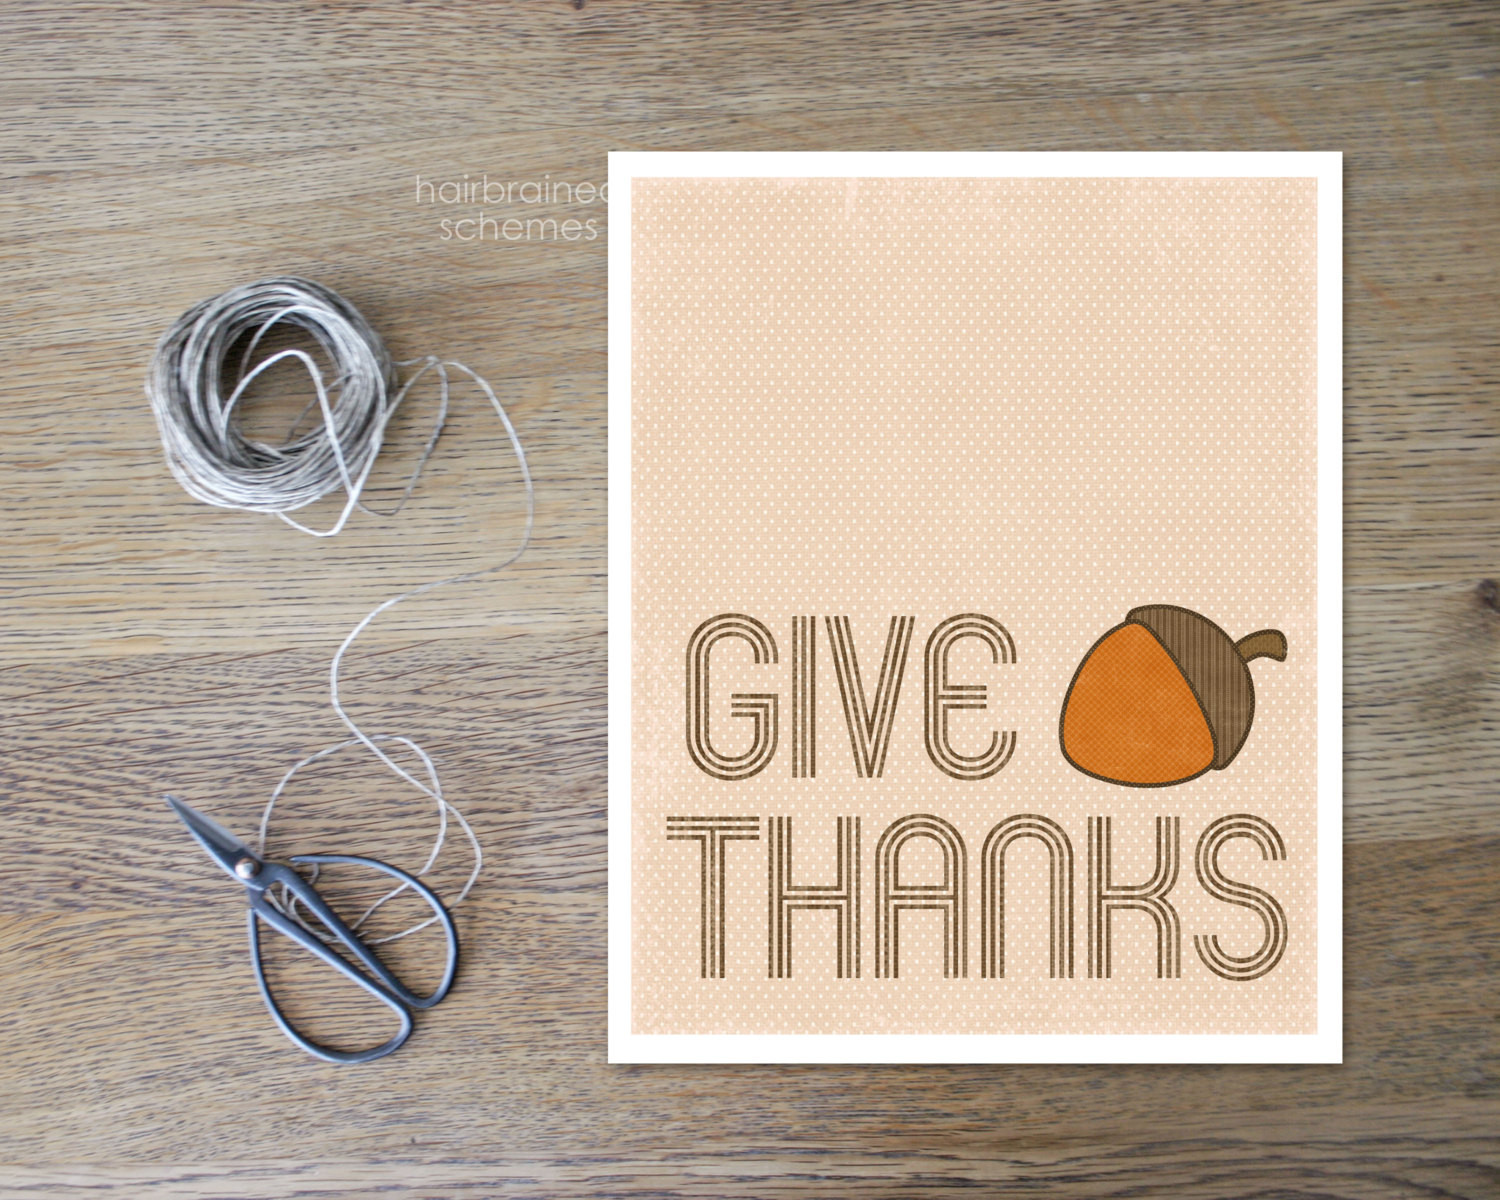 Thanksgiving Wall Decor
 Thanksgiving Wall Art Give Thanks Home by hairbrainedschemes